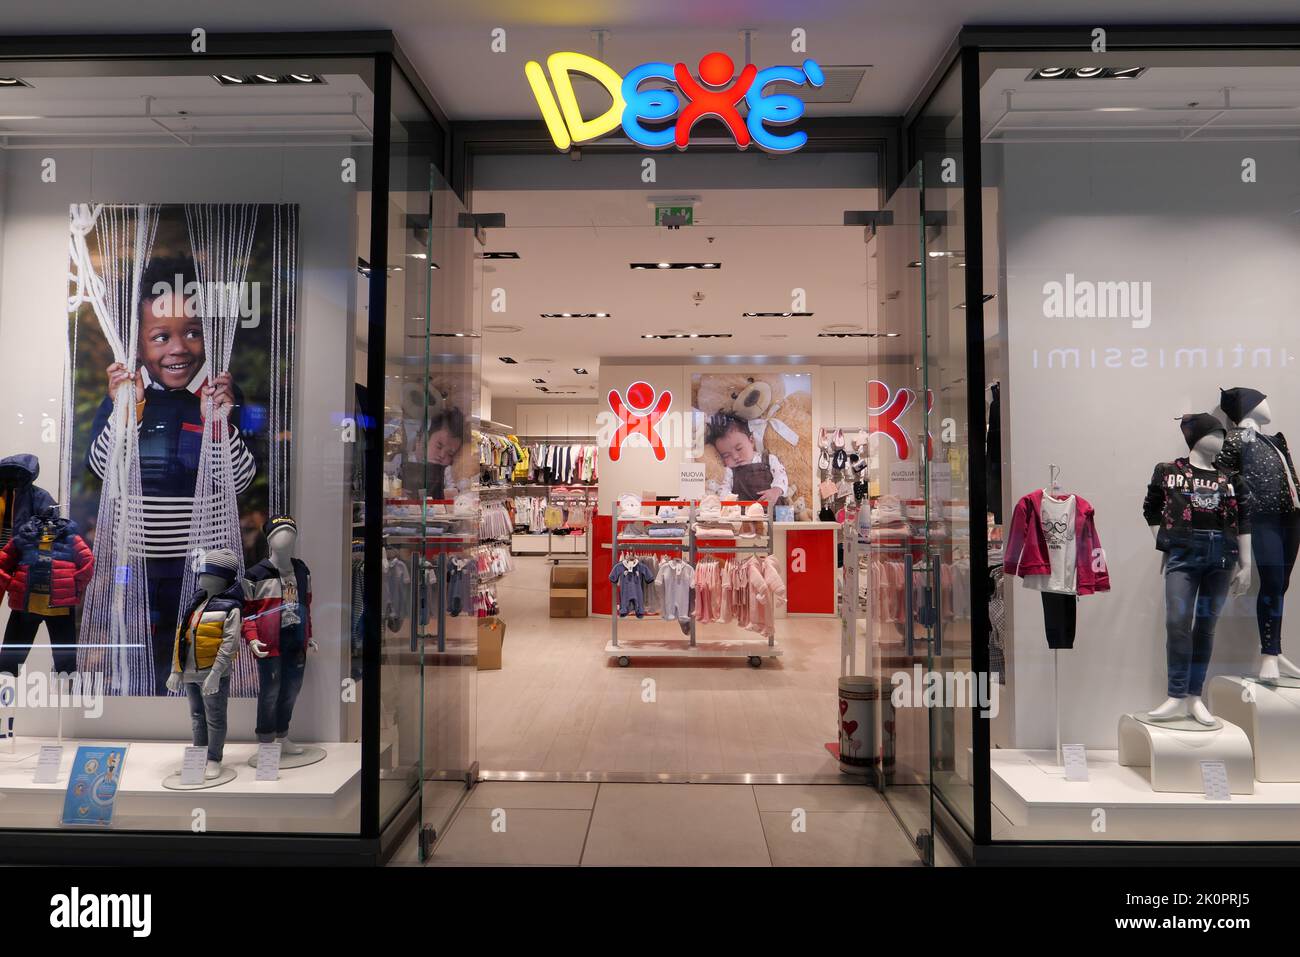 IDEXE CHILDREN'S CLOTHING STORE ENTRANCE Stock Photo